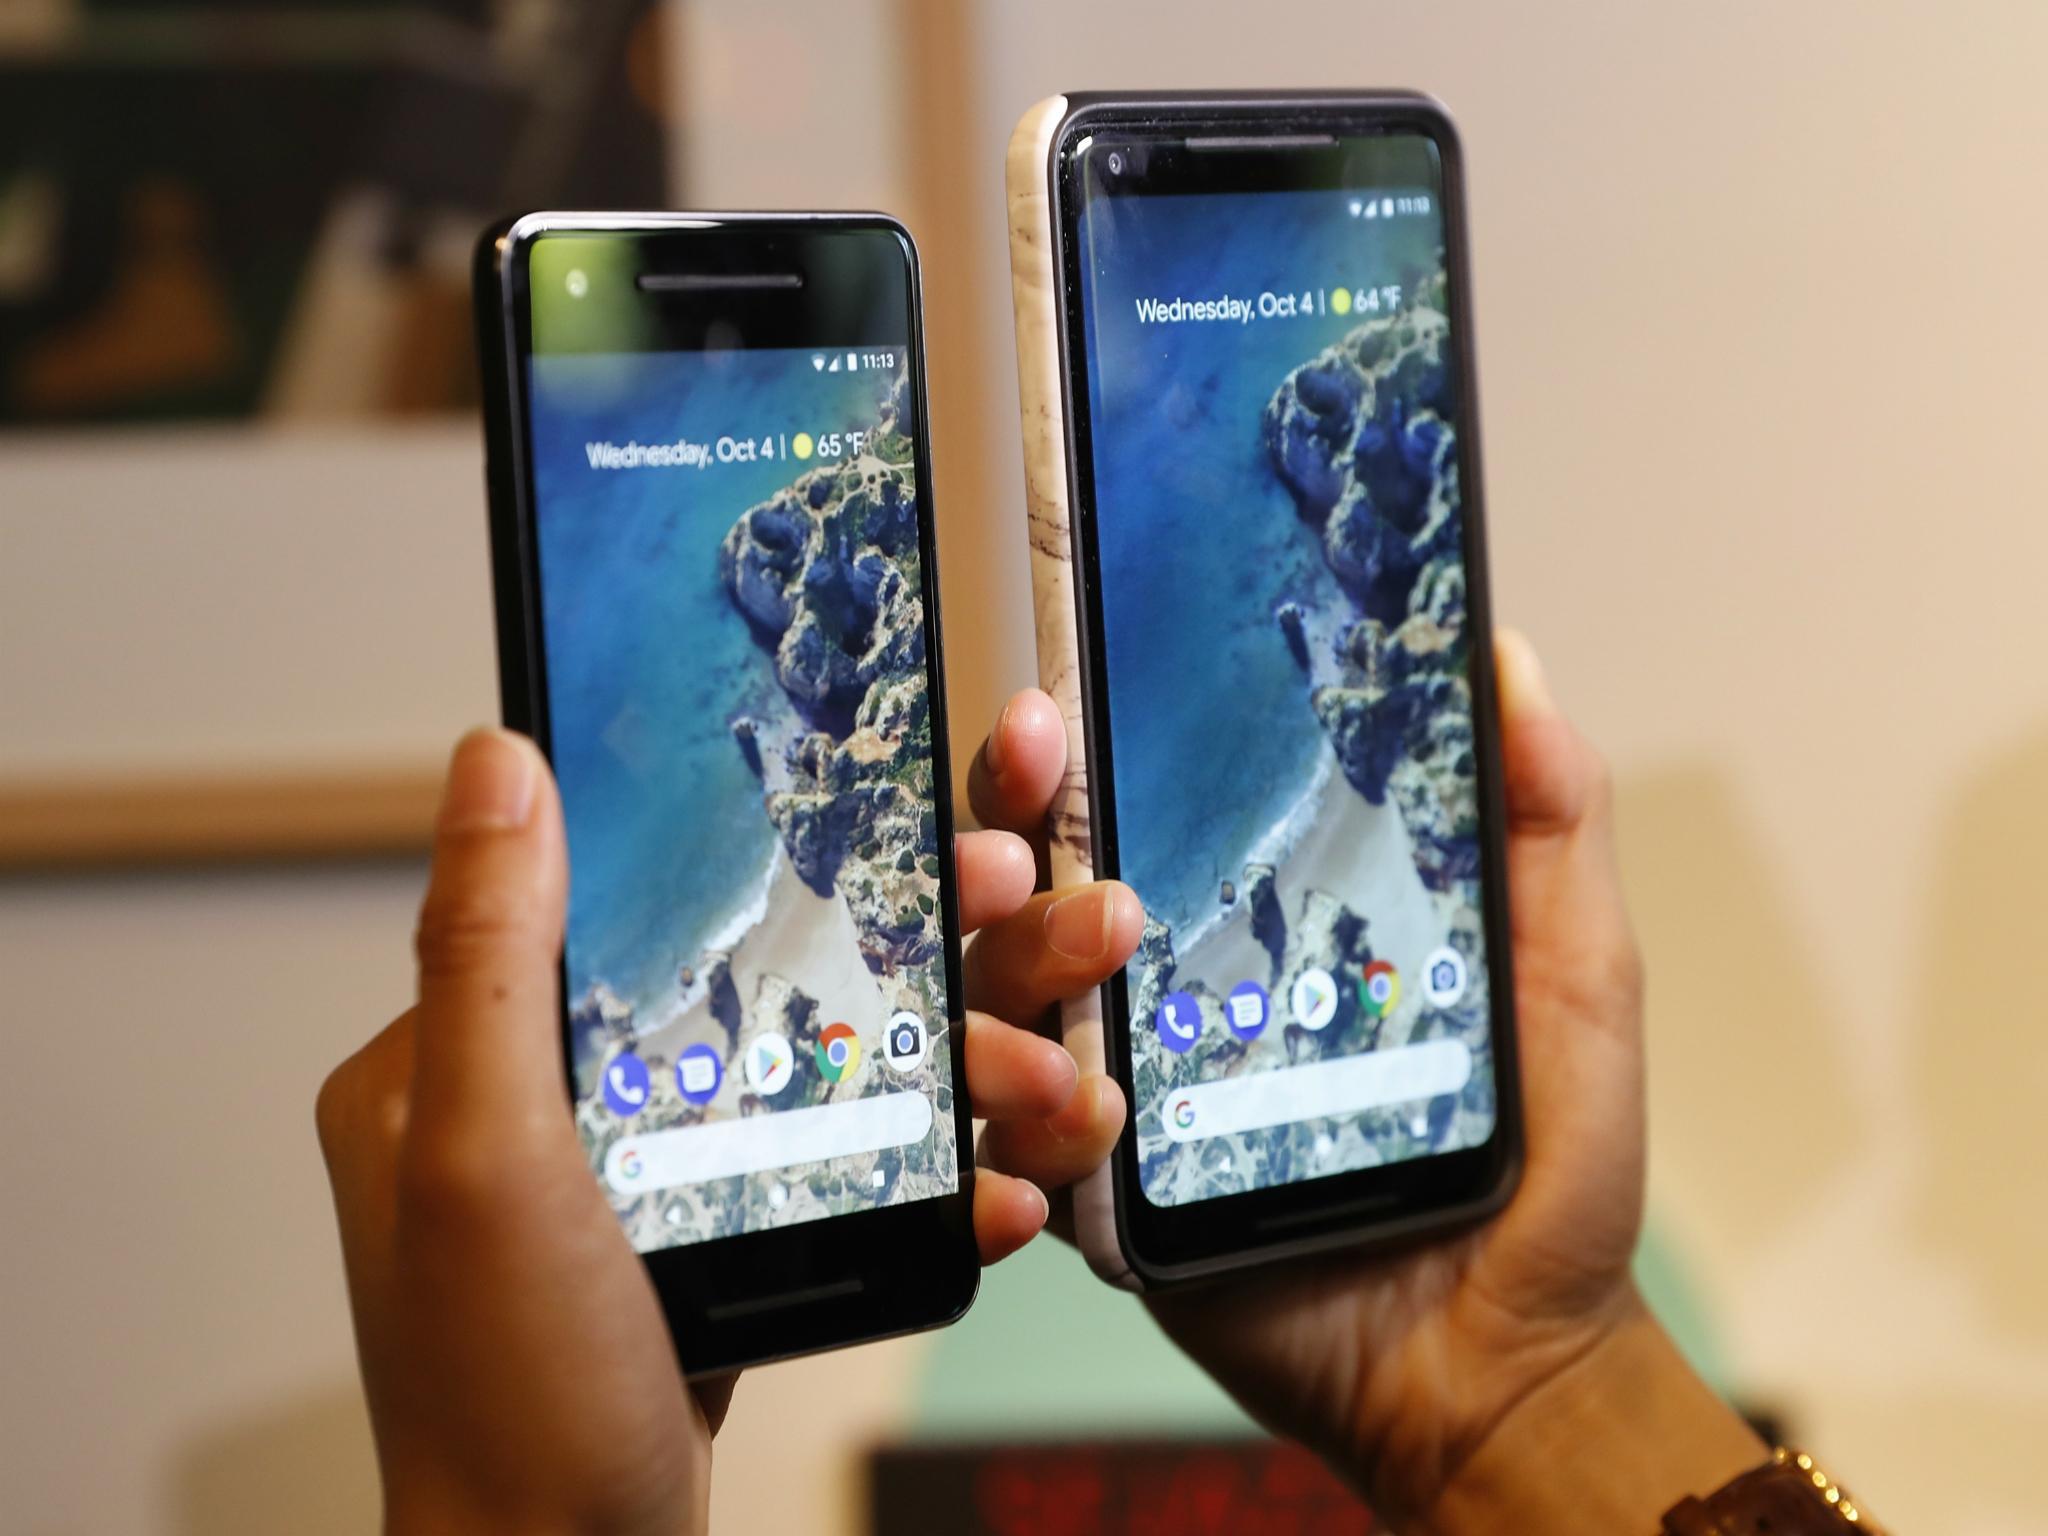 People compare Google phones during a launch event in San Francisco, California, U.S. October 4, 2017